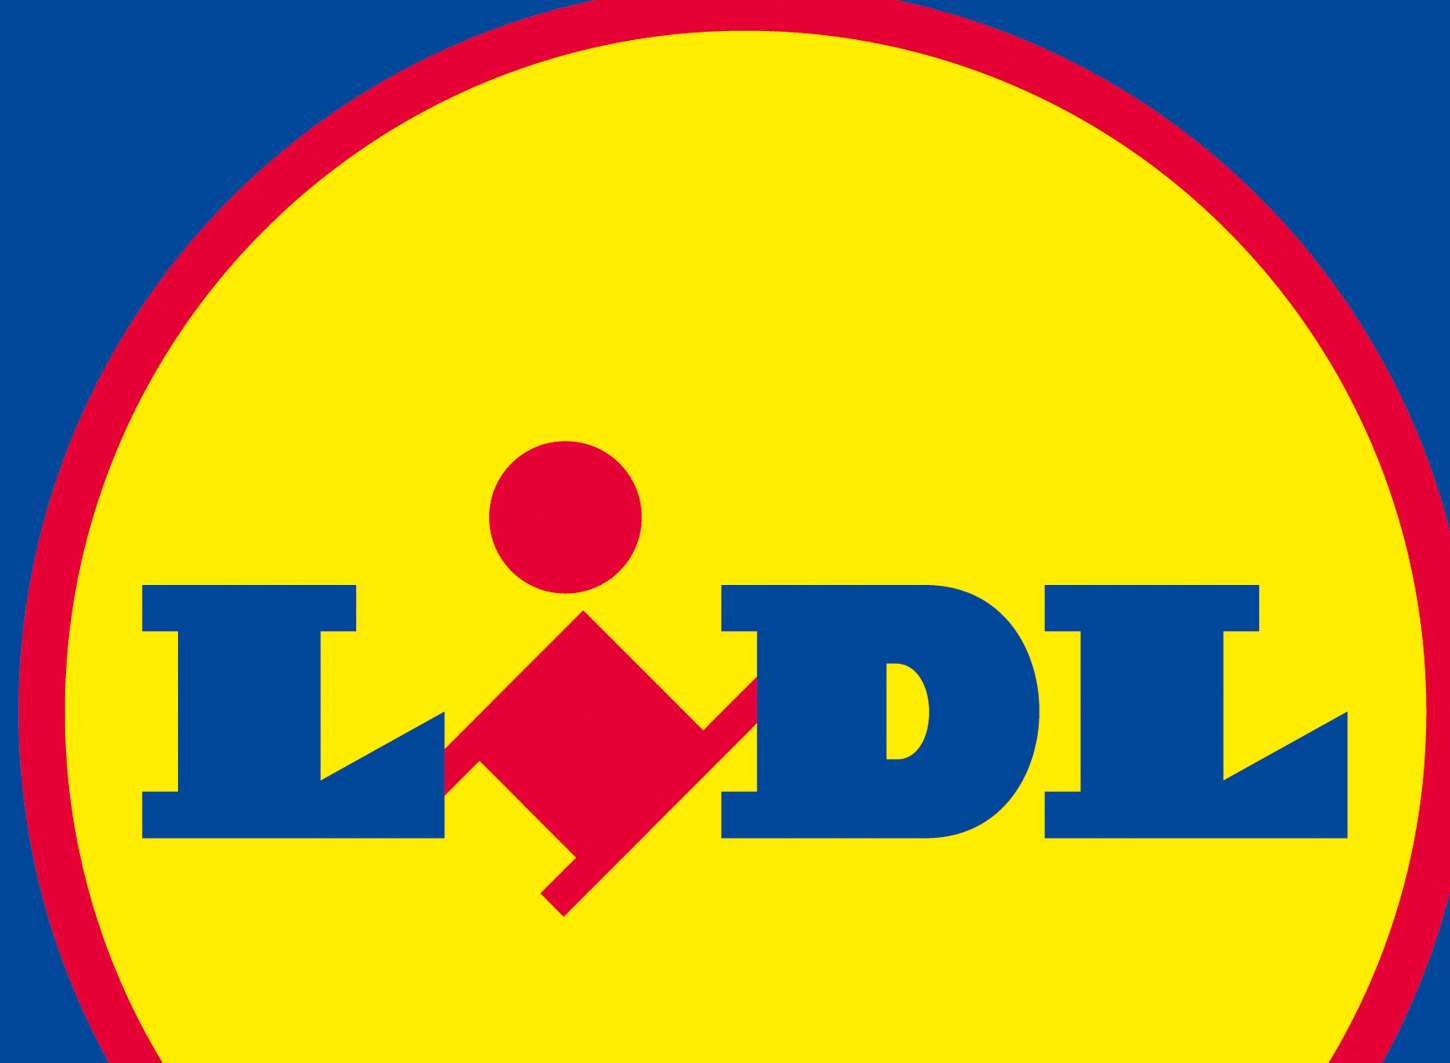 Lidl will open a store at Whitfield's Honeywood Retail Park after Dover